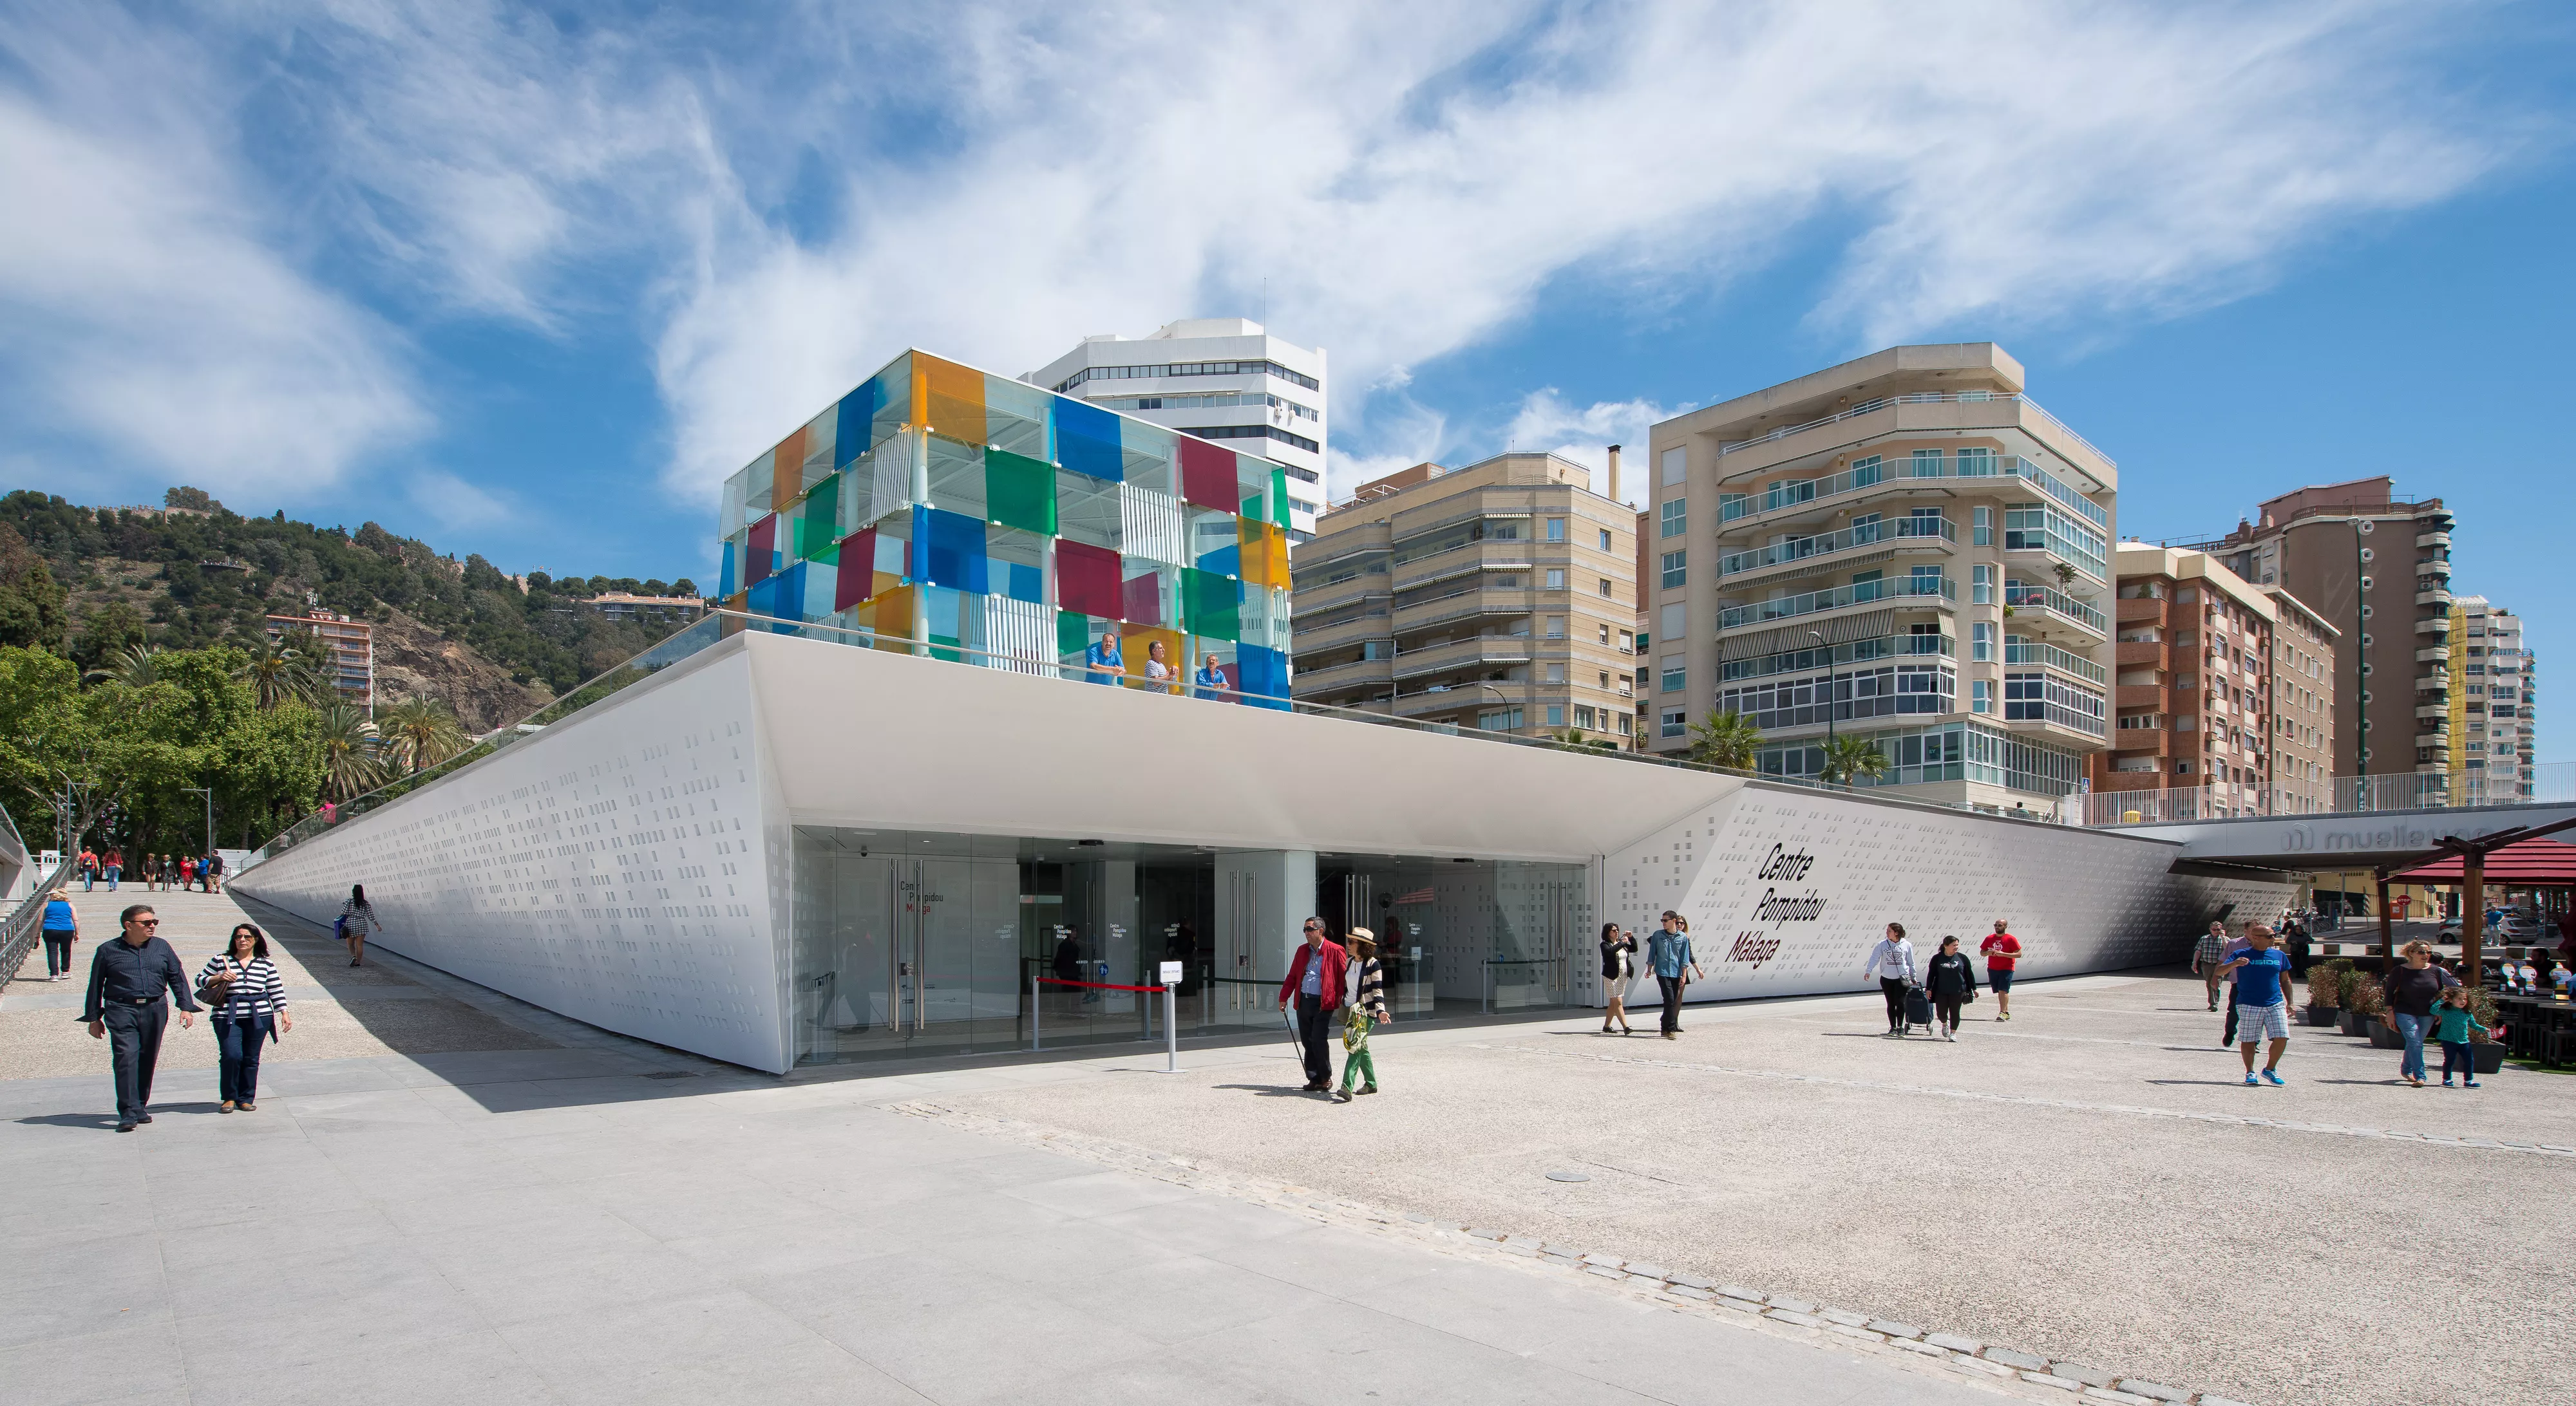 Centre Pompidou Malaga in Spain, Europe | Art Galleries - Rated 3.7